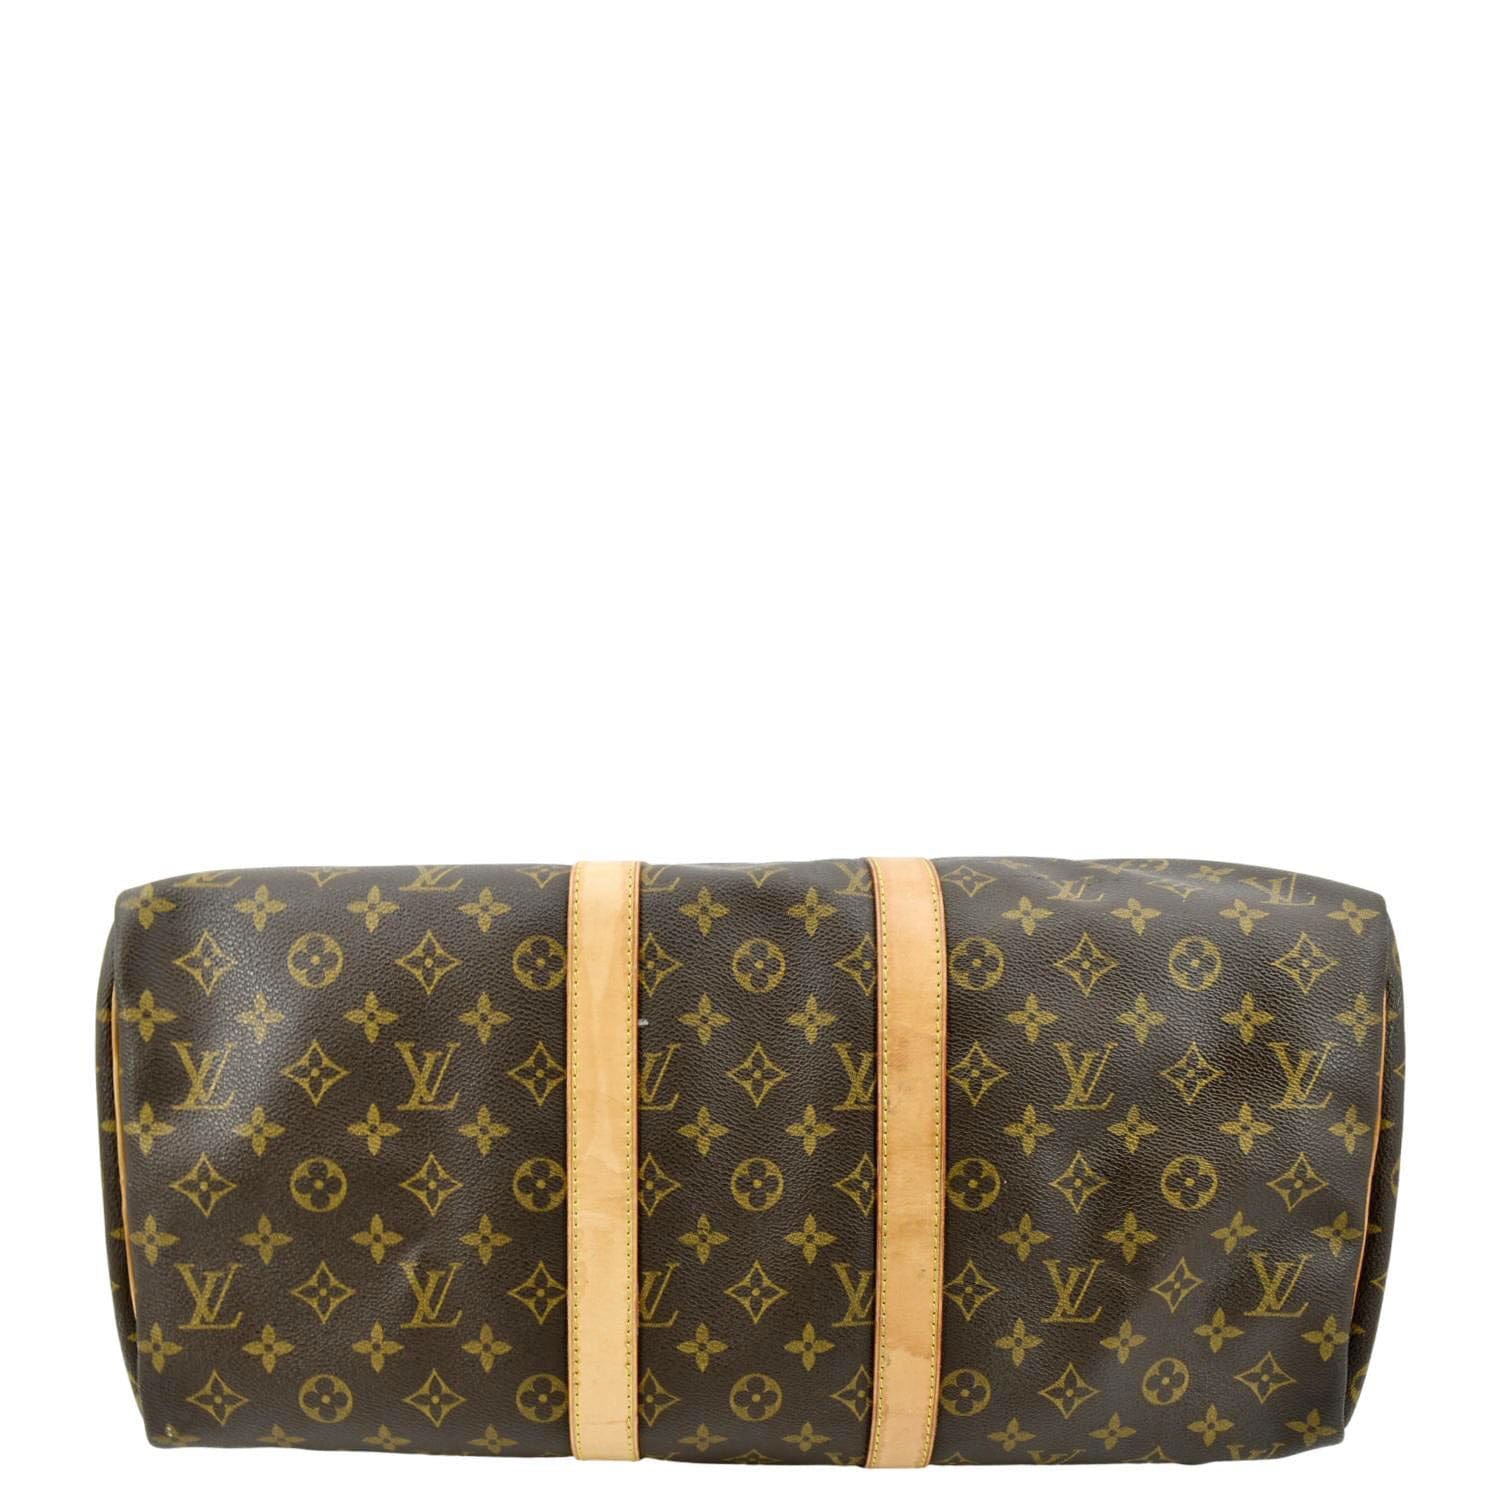 The Ultimate Louis Vuitton Keepall Size Guide: Finding Your